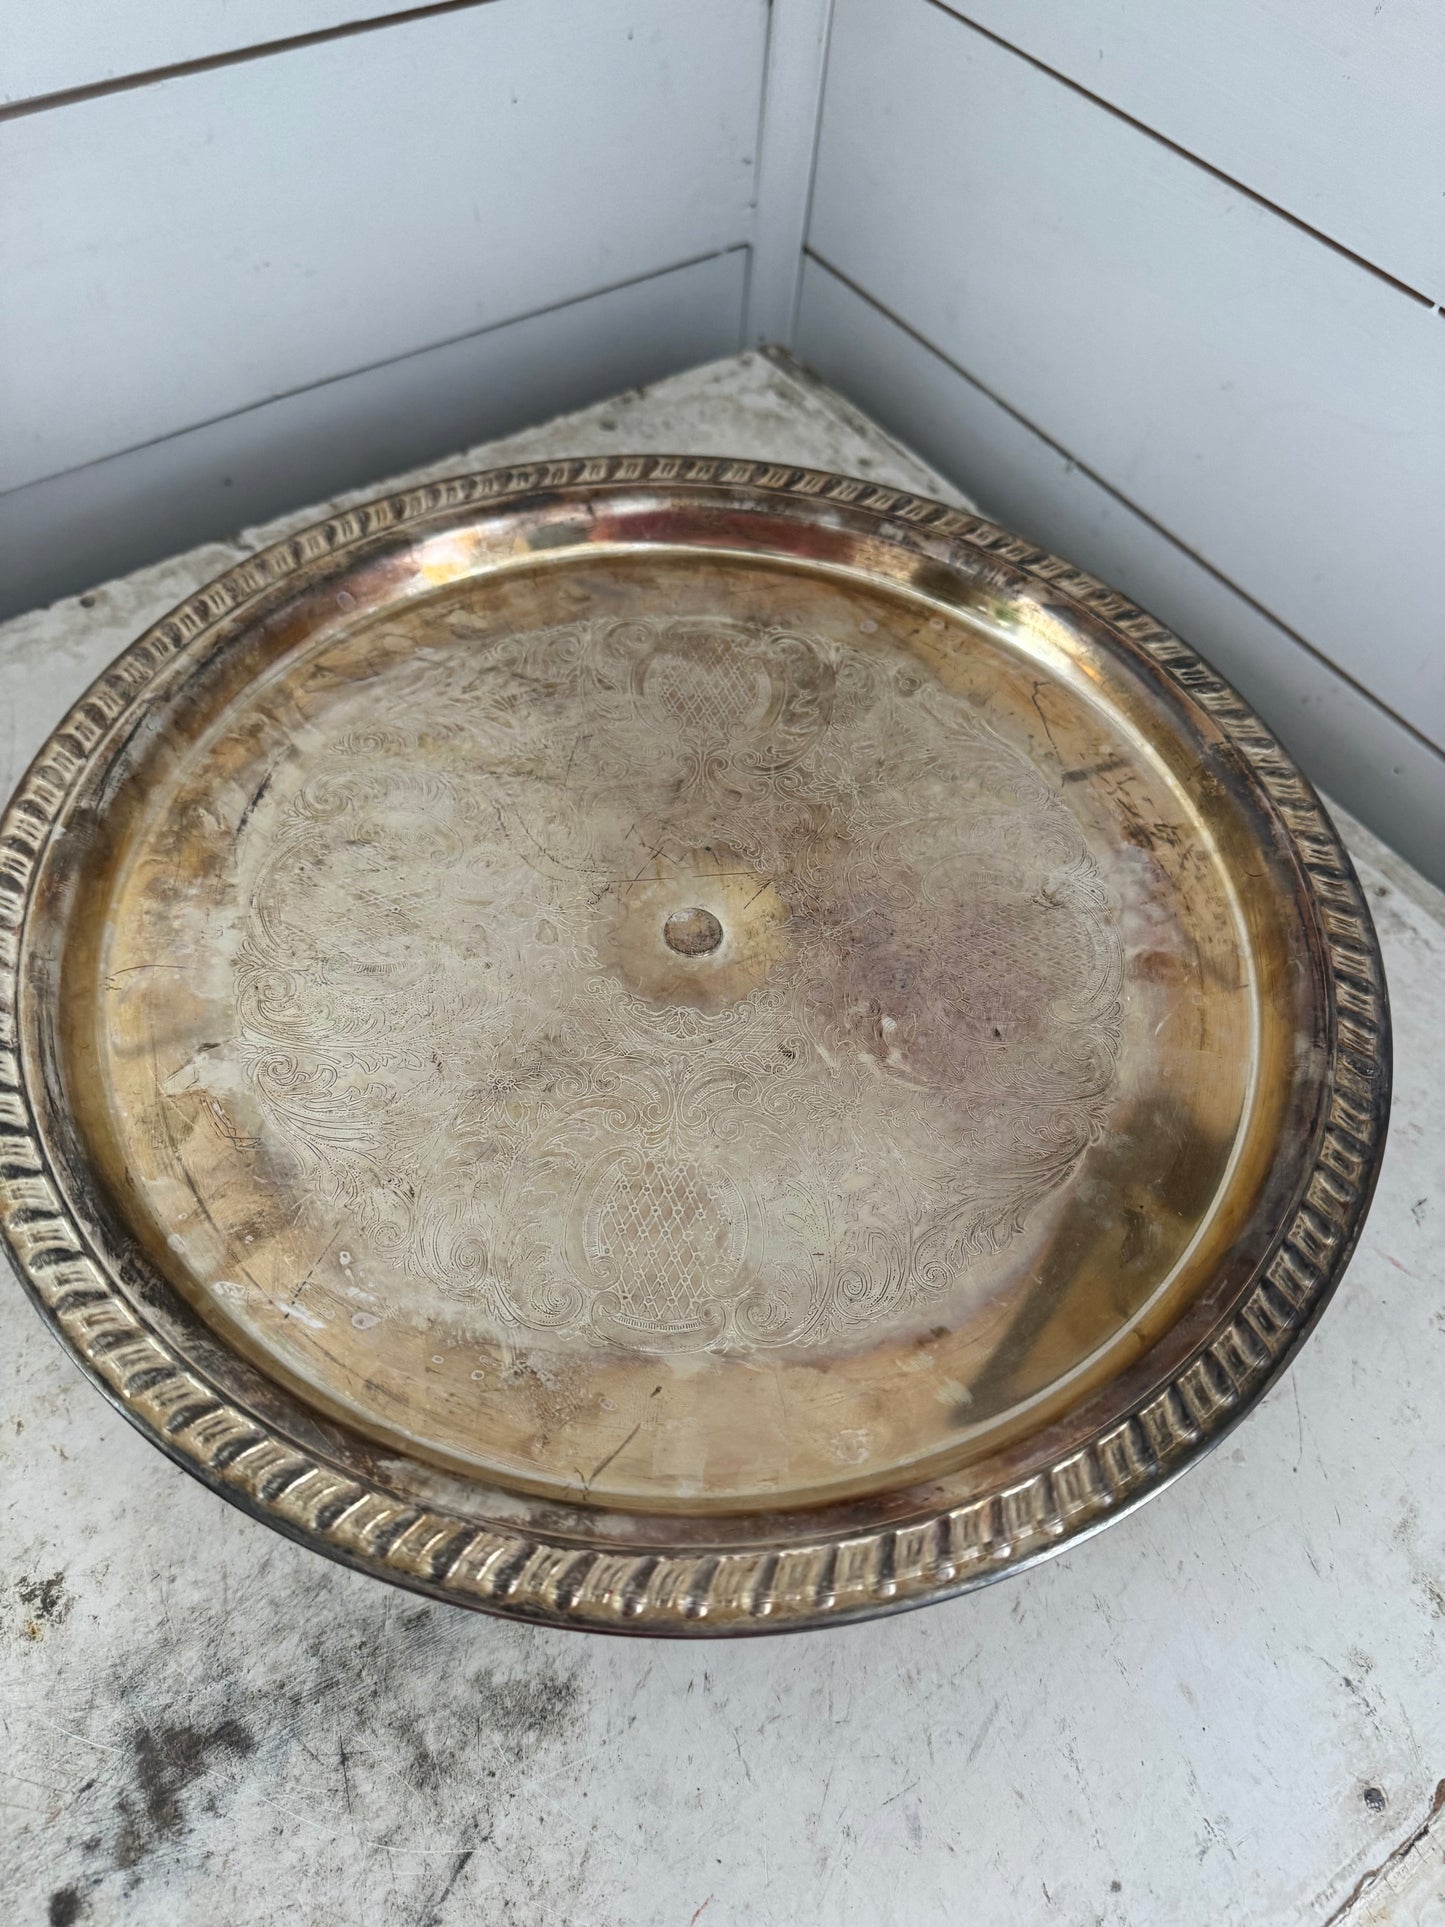 Vintage Silverplate Cake Stand